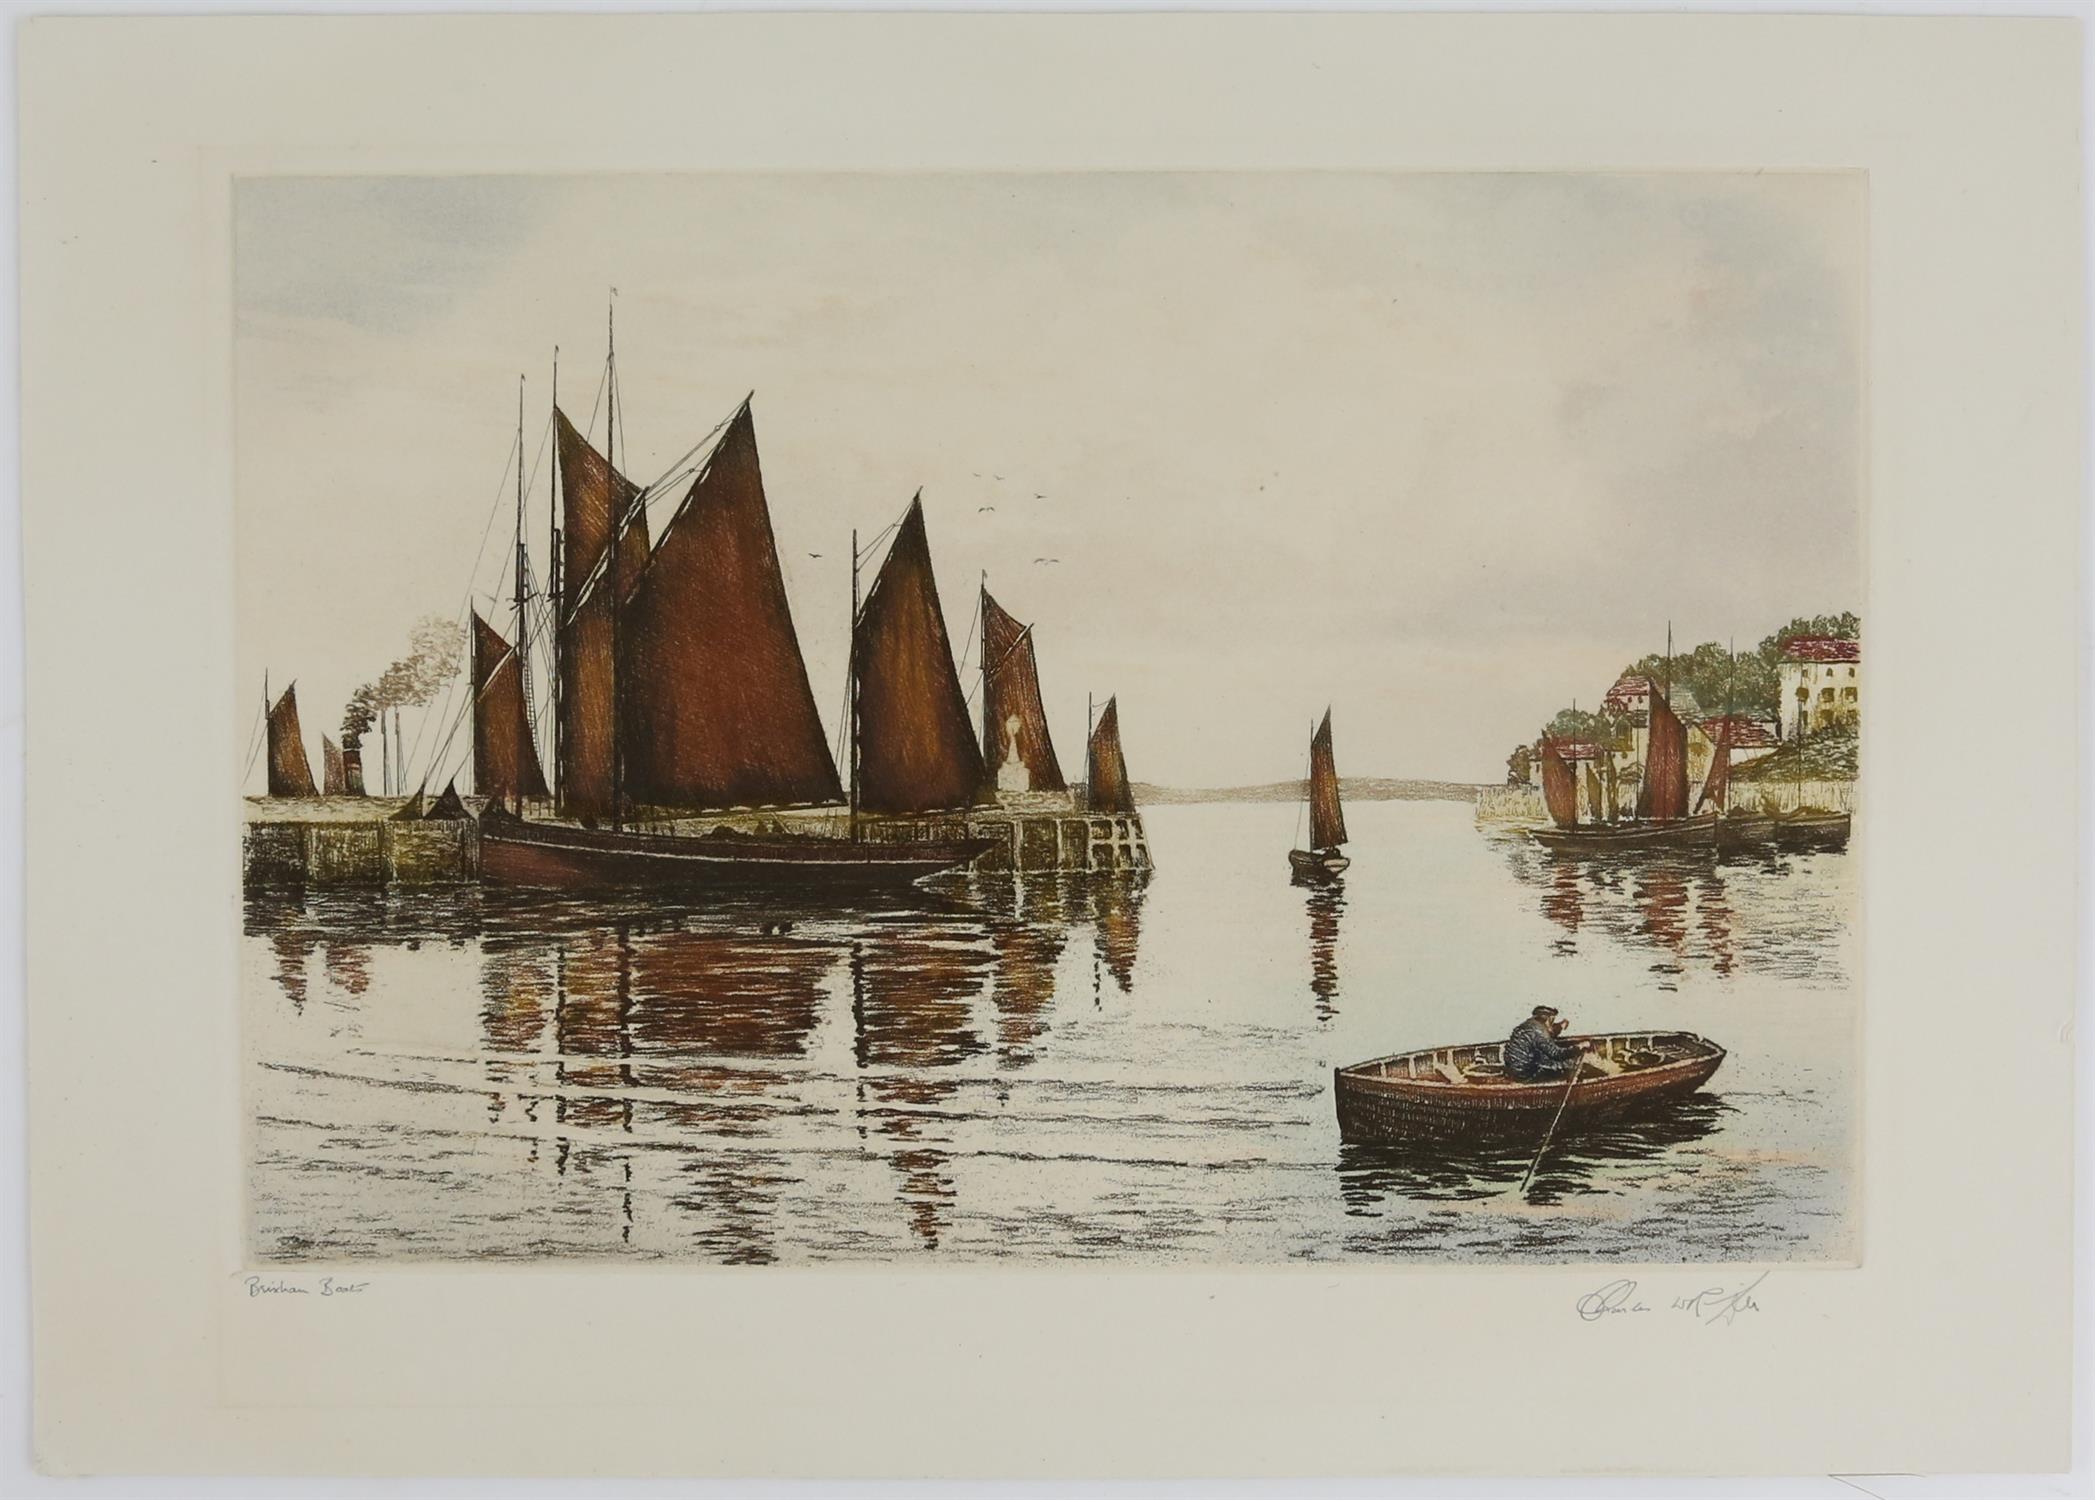 Charles Riley 'Brixham boats' etching printed in colour, signed indistinctly and titled in pencil. - Image 3 of 6